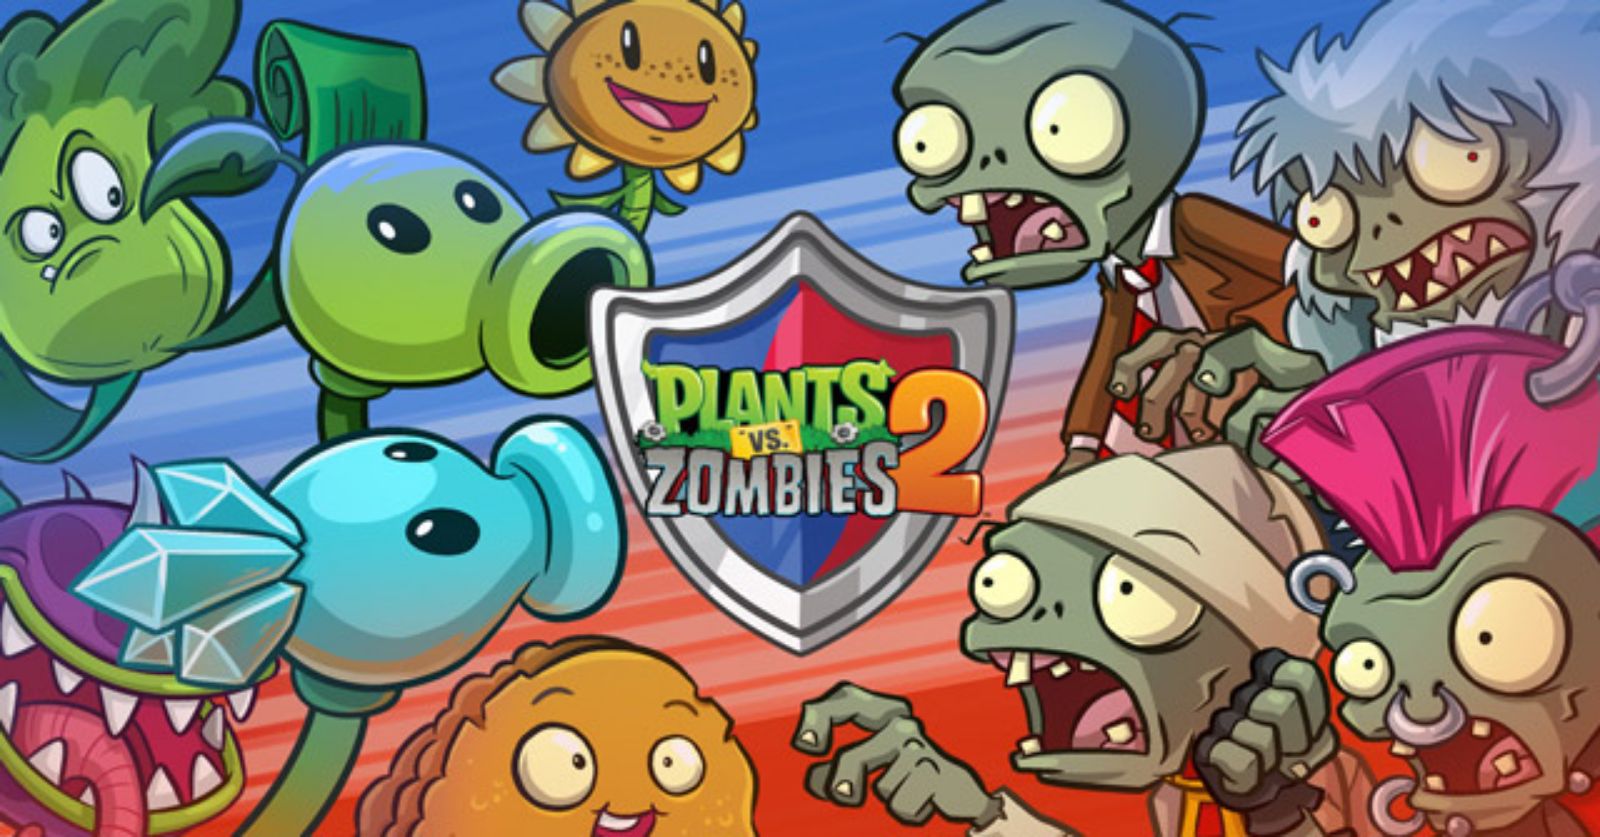 Ghost Pepper | Plants vs. Zombies Wiki Tiếng Việt | Fandom